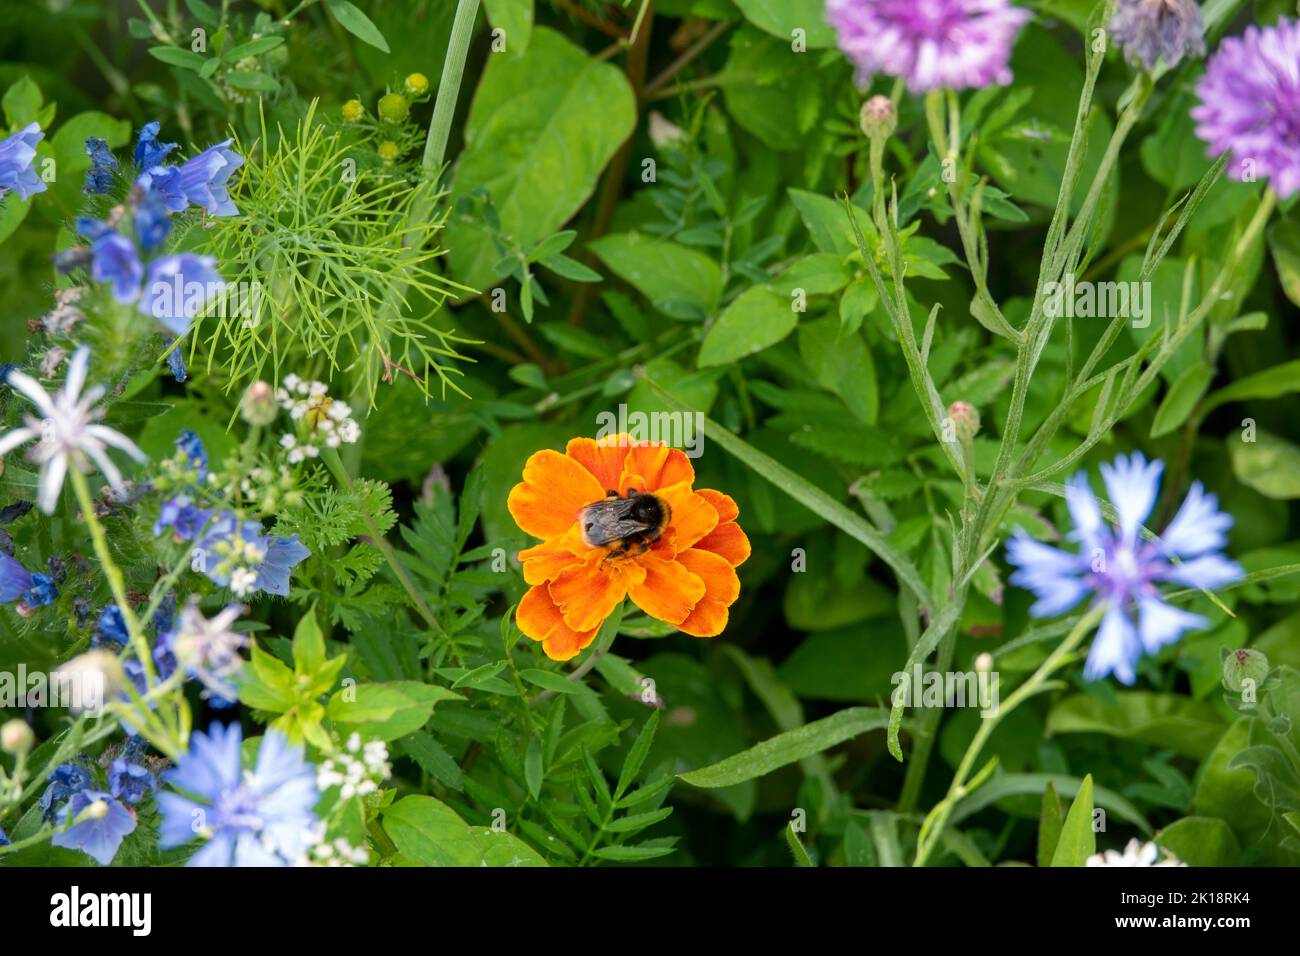 bumble bee collecting pollen from orange and yellow flower of tageses patula the french marigold with colourful wildflowers blurred in the background Stock Photo